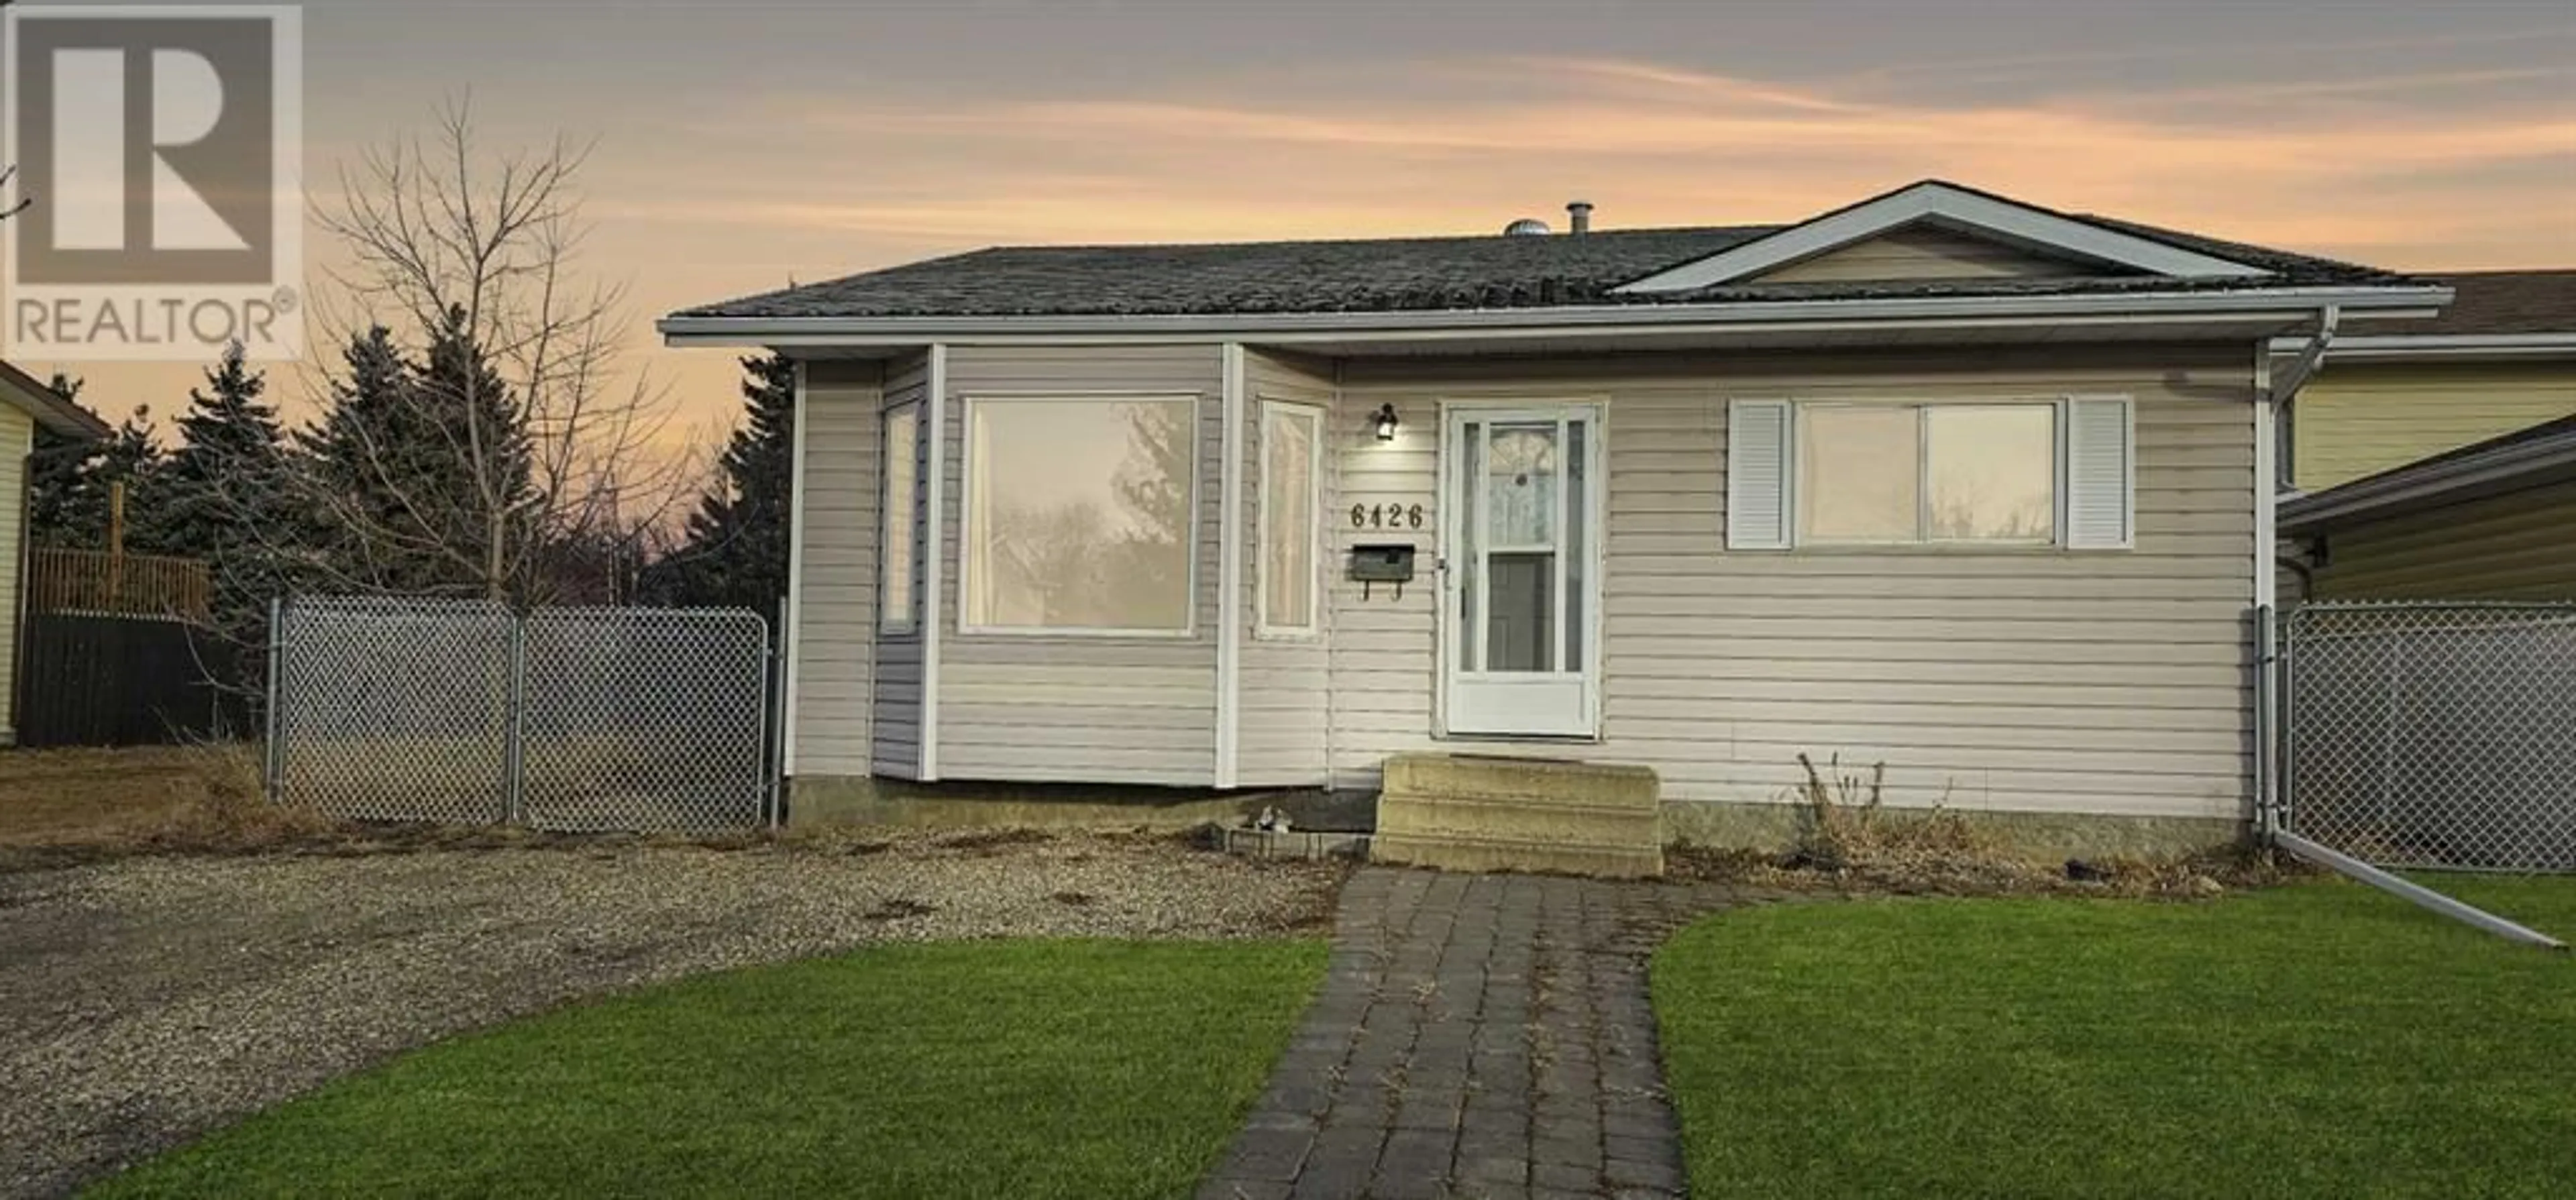 Frontside or backside of a home for 6426 Poplar Drive, Grande Prairie Alberta T8W2G2